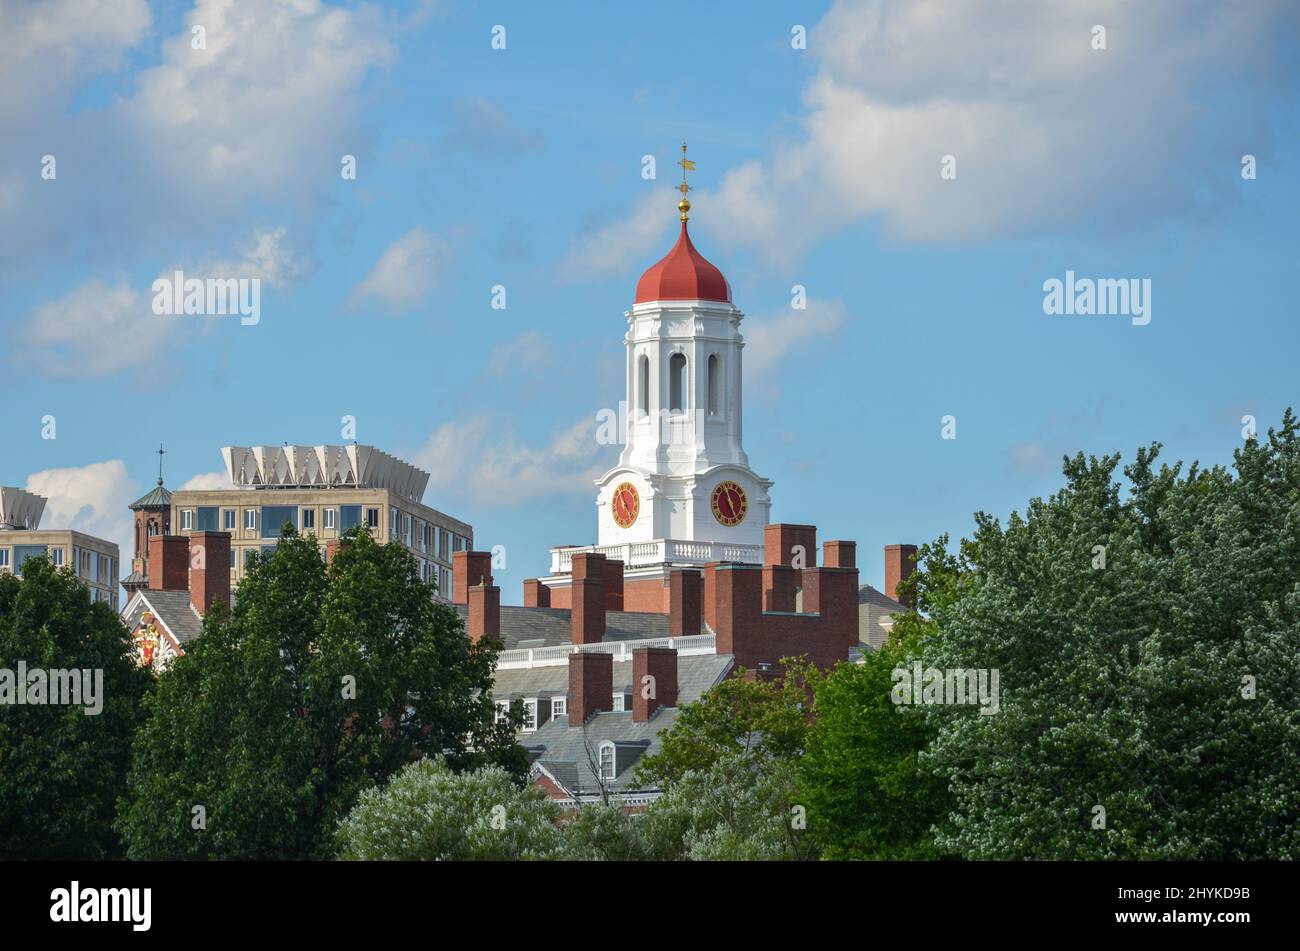 Boston, USA - August 3 2013: View through trees to the Harvard University Dunster House with its red domed roof and the red tower clock Stock Photo